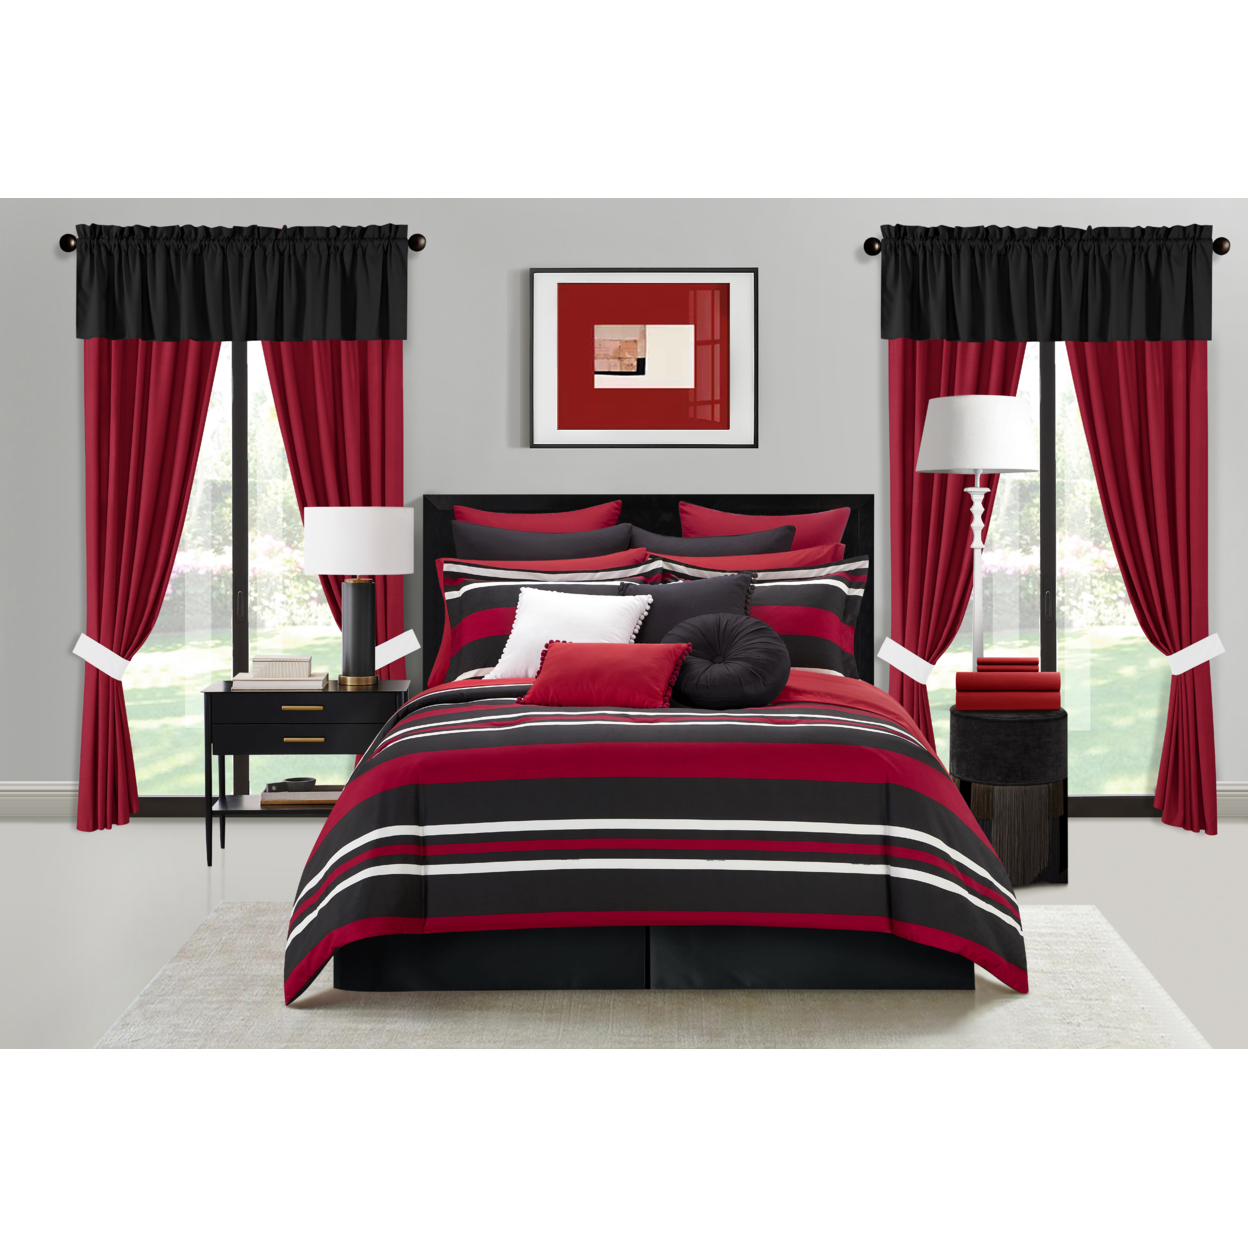 Heriberto 30 Piece Comforter Set Striped Tone On Tone Design Bed In A Bag Bedding - Red, King